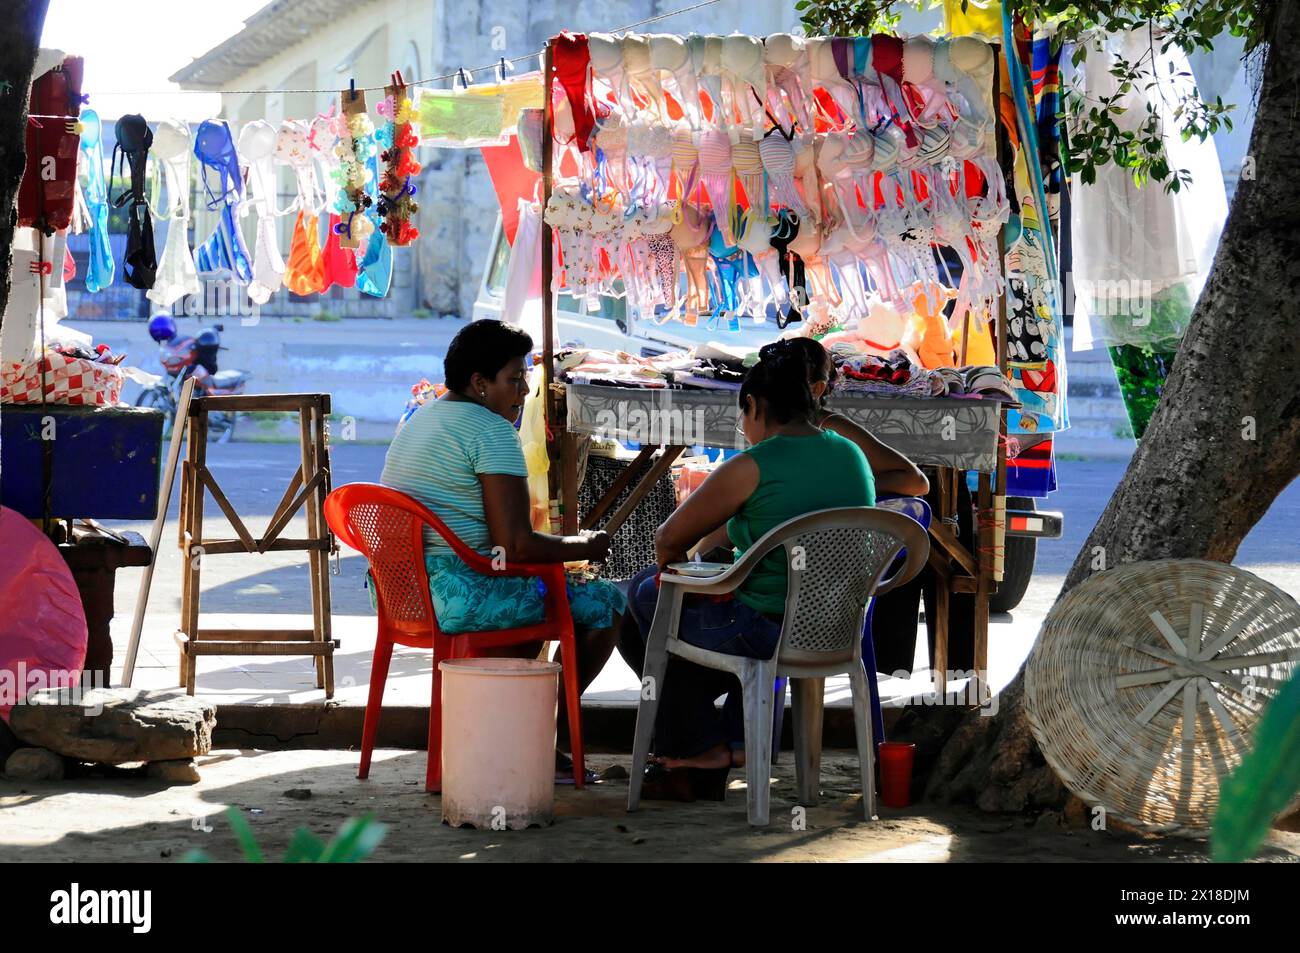 Leon Nicaragua, Market stall with clothes and seated people in the shade of a tree, Nicaragua, Central America, Central America Stock Photo